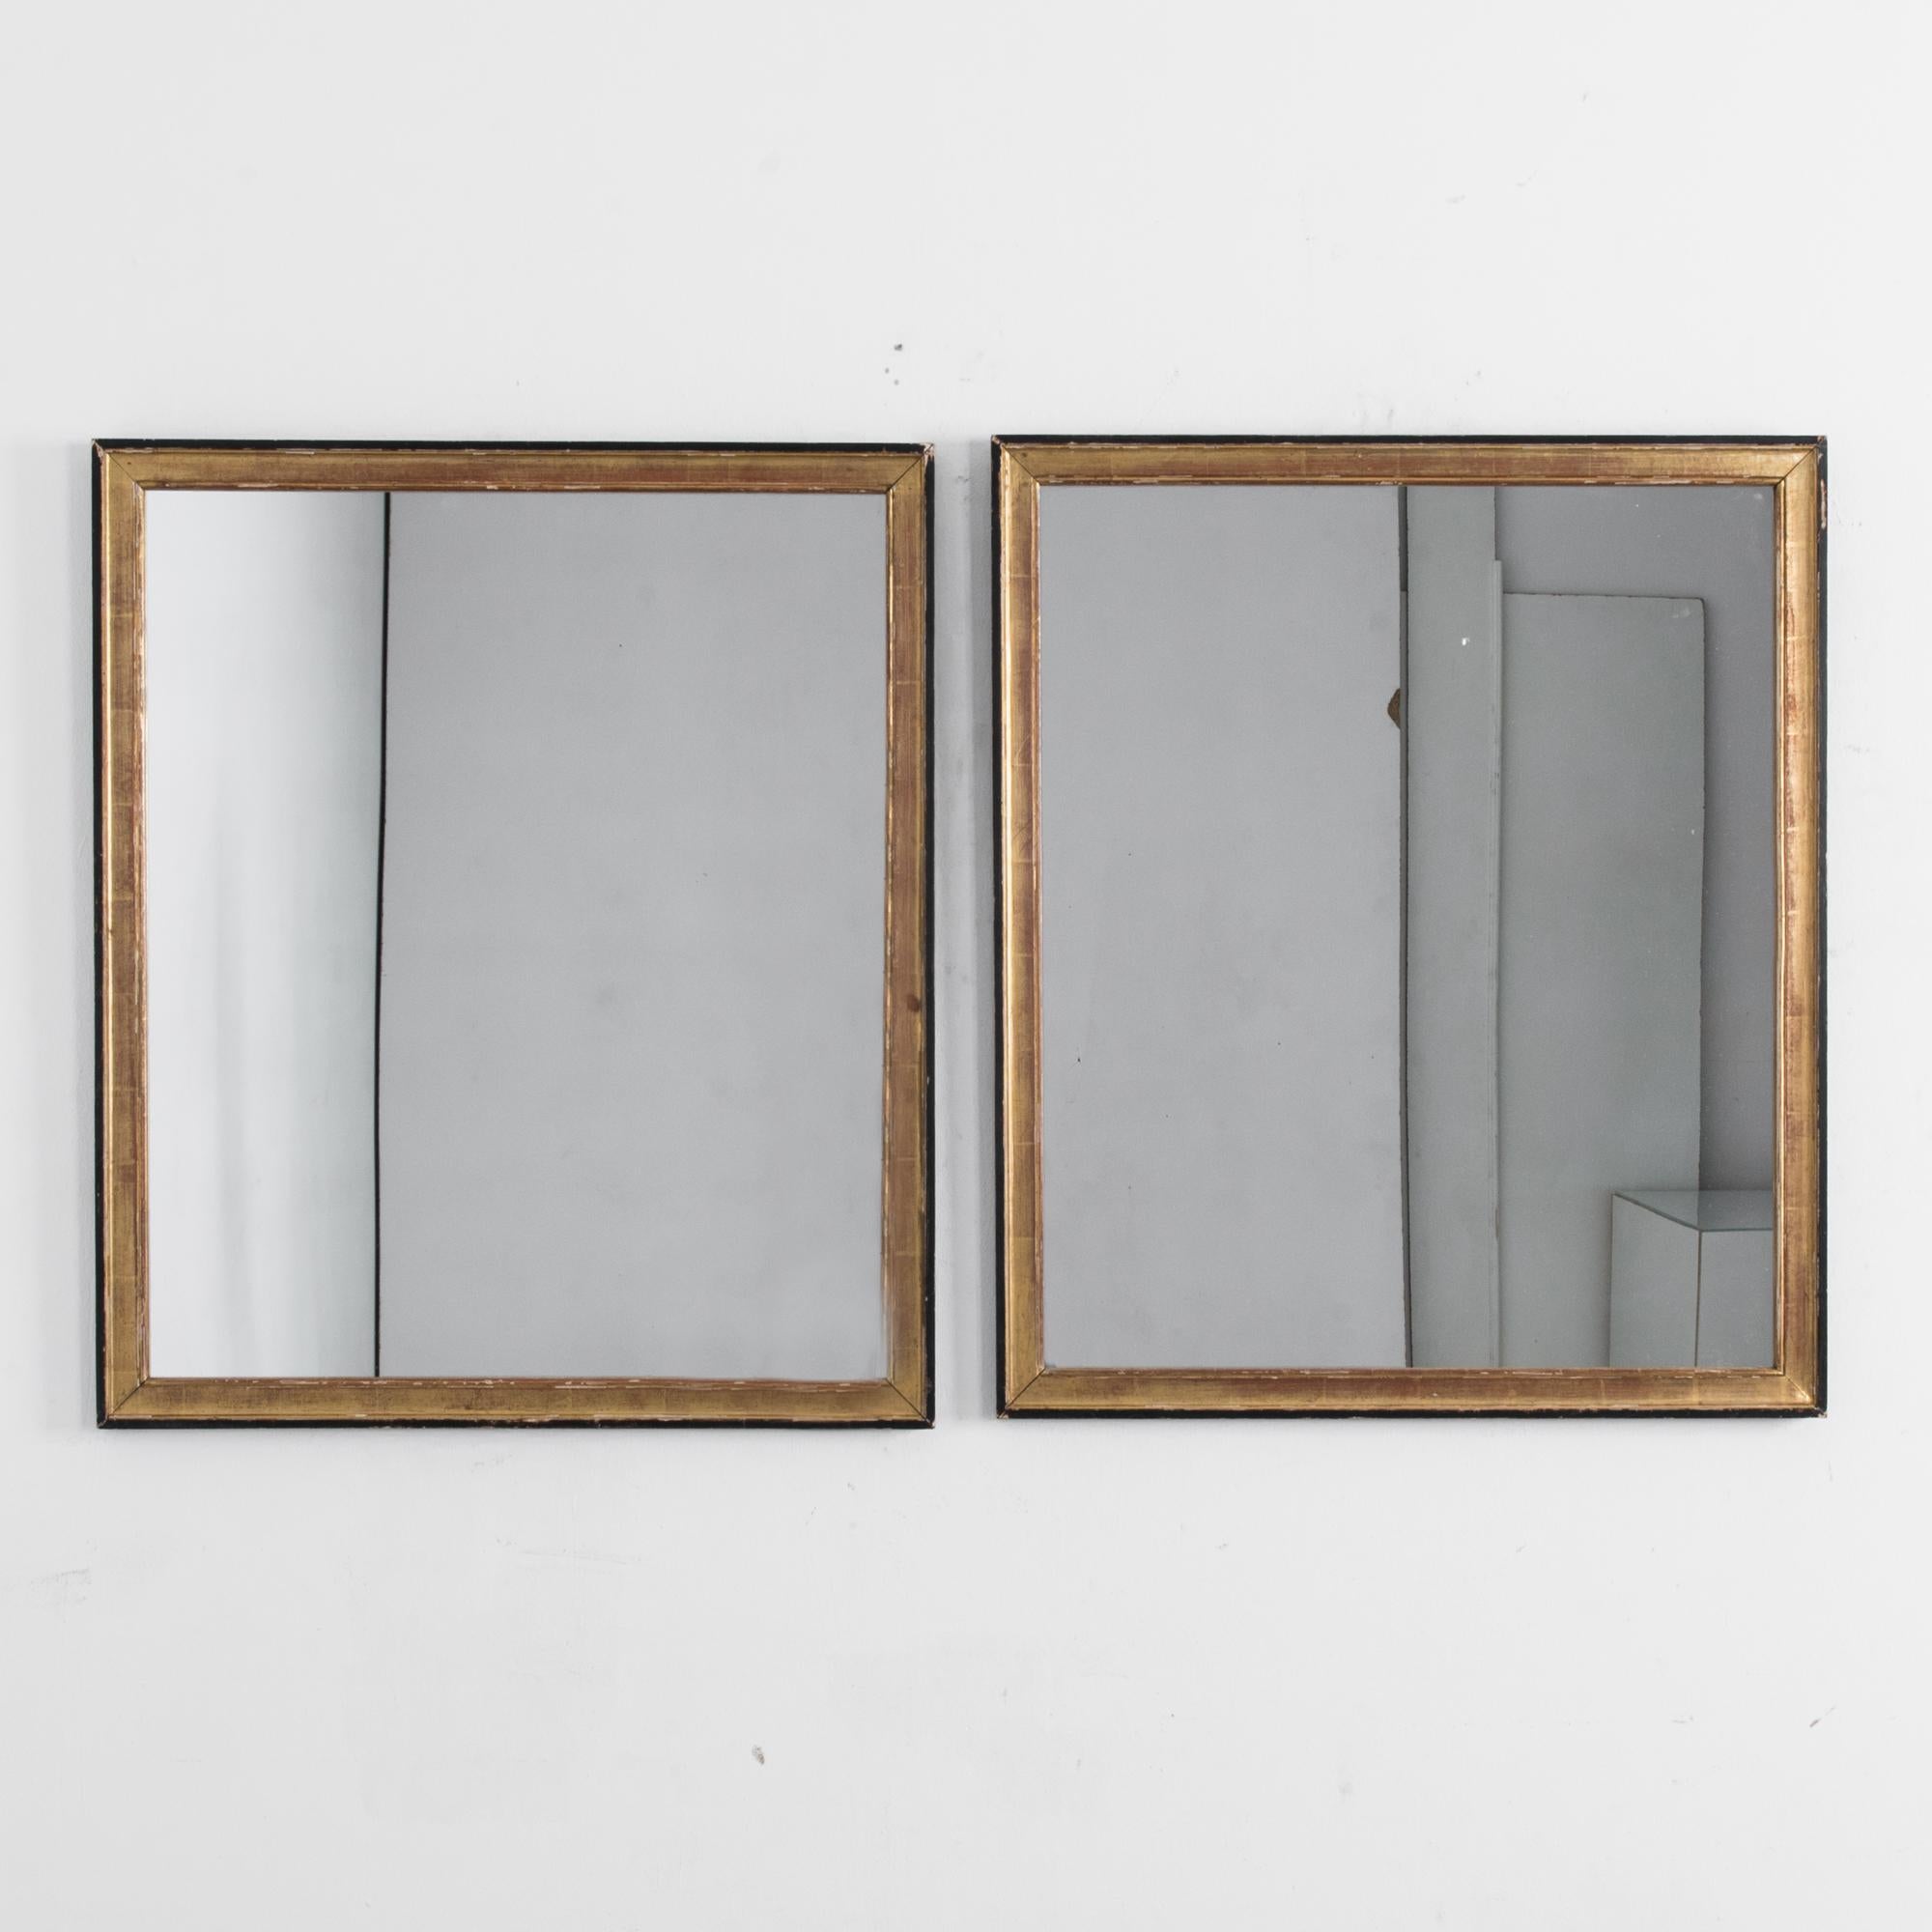 A pair of mirrors from France, circa 1900. A thin rectangular wooden frame creates a clean, sharp outline. The frame is gilded and the outer edges are painted black, creating a stylish contrast. A gentle patina softens the painted surface of the